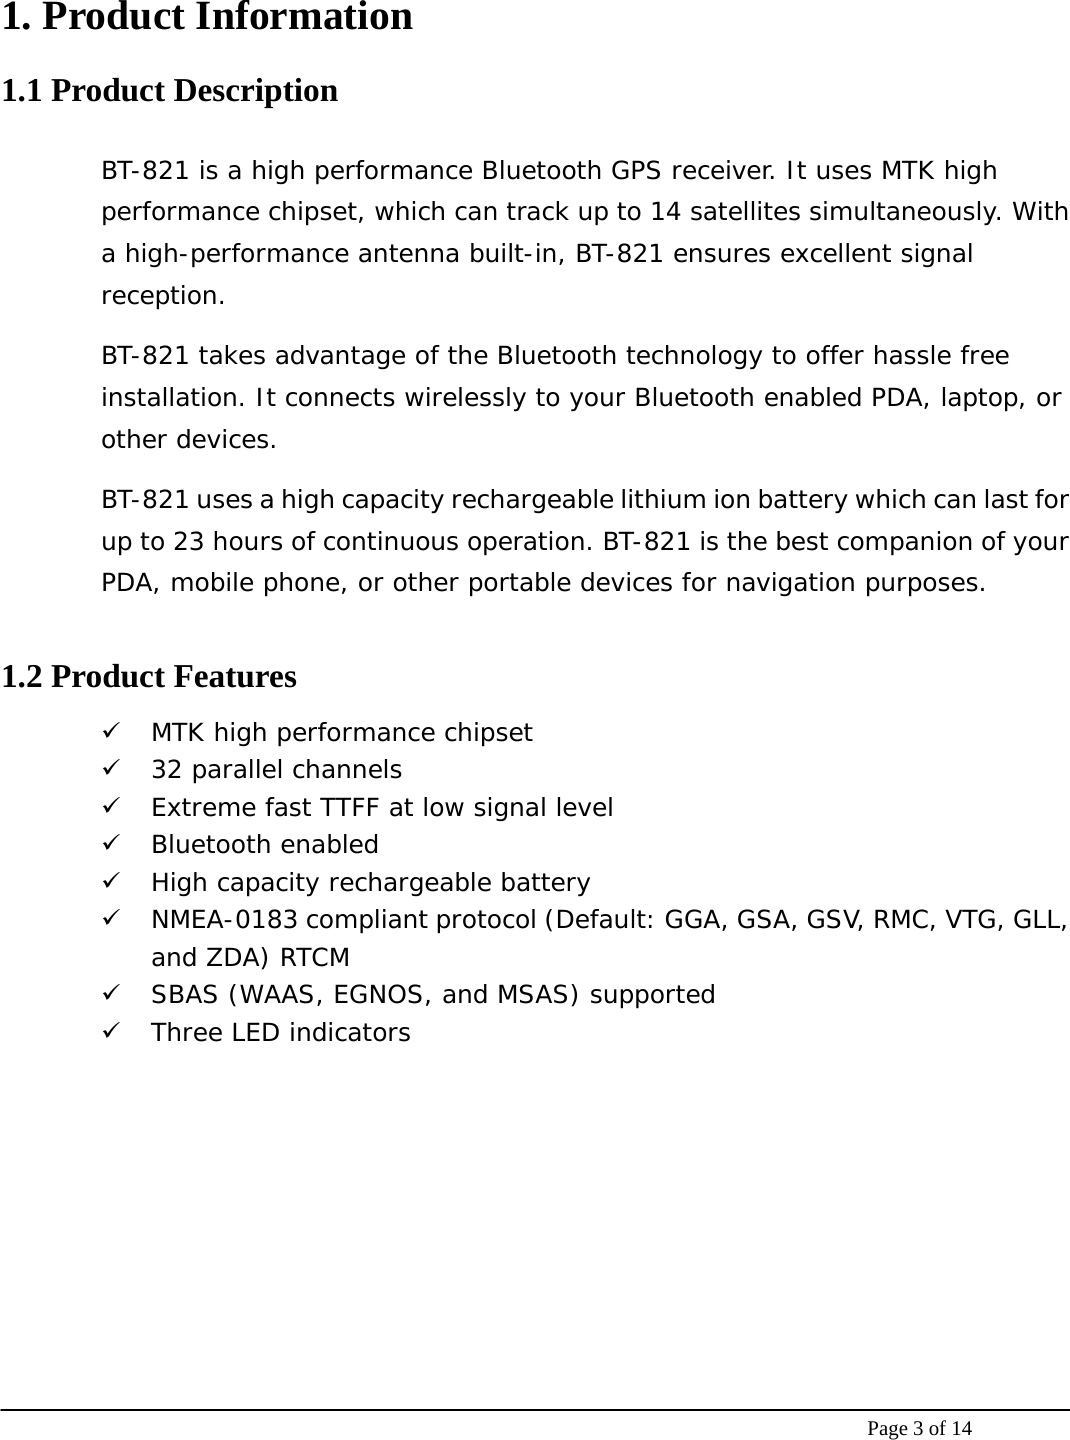    Page 3 of 14 1. Product Information 1.1 Product Description BT-821 is a high performance Bluetooth GPS receiver. It uses MTK high performance chipset, which can track up to 14 satellites simultaneously. With a high-performance antenna built-in, BT-821 ensures excellent signal reception.  BT-821 takes advantage of the Bluetooth technology to offer hassle free installation. It connects wirelessly to your Bluetooth enabled PDA, laptop, or other devices. BT-821 uses a high capacity rechargeable lithium ion battery which can last for up to 23 hours of continuous operation. BT-821 is the best companion of your PDA, mobile phone, or other portable devices for navigation purposes.  1.2 Product Features 9 MTK high performance chipset 9 32 parallel channels 9 Extreme fast TTFF at low signal level 9 Bluetooth enabled 9 High capacity rechargeable battery 9 NMEA-0183 compliant protocol (Default: GGA, GSA, GSV, RMC, VTG, GLL, and ZDA) RTCM  9 SBAS (WAAS, EGNOS, and MSAS) supported 9 Three LED indicators  